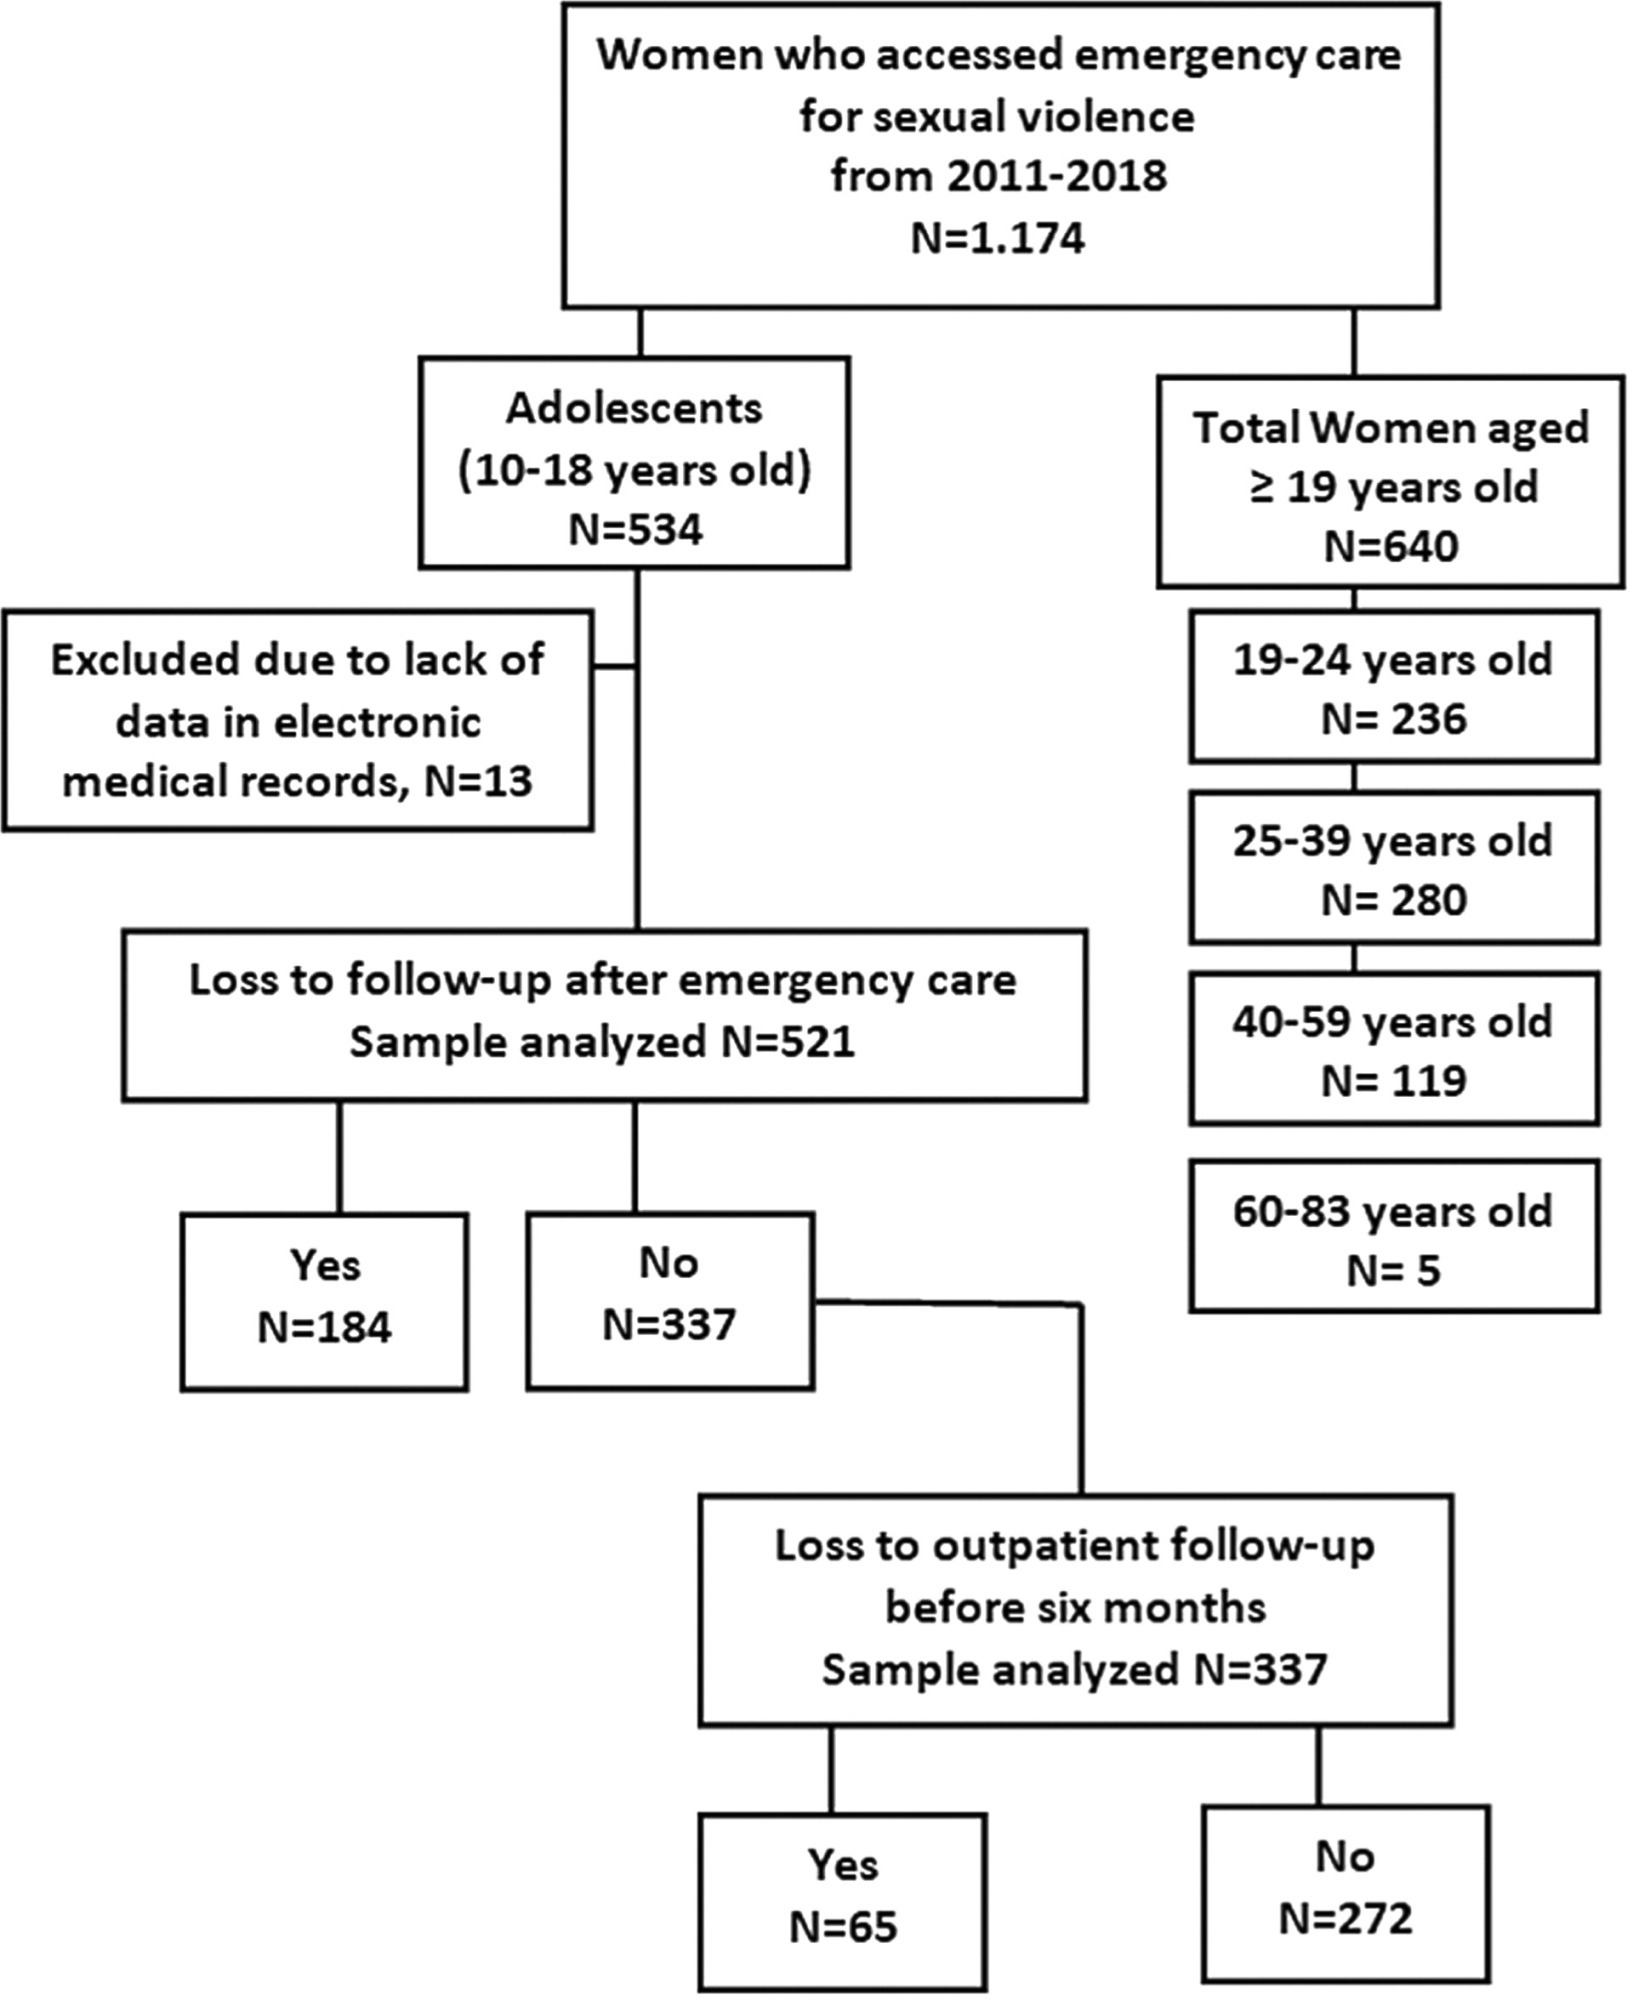 Adolescent Female Victims of Sexual Violence: Analysis of Loss of Follow-up after Emergency Care and Outpatient Follow-up